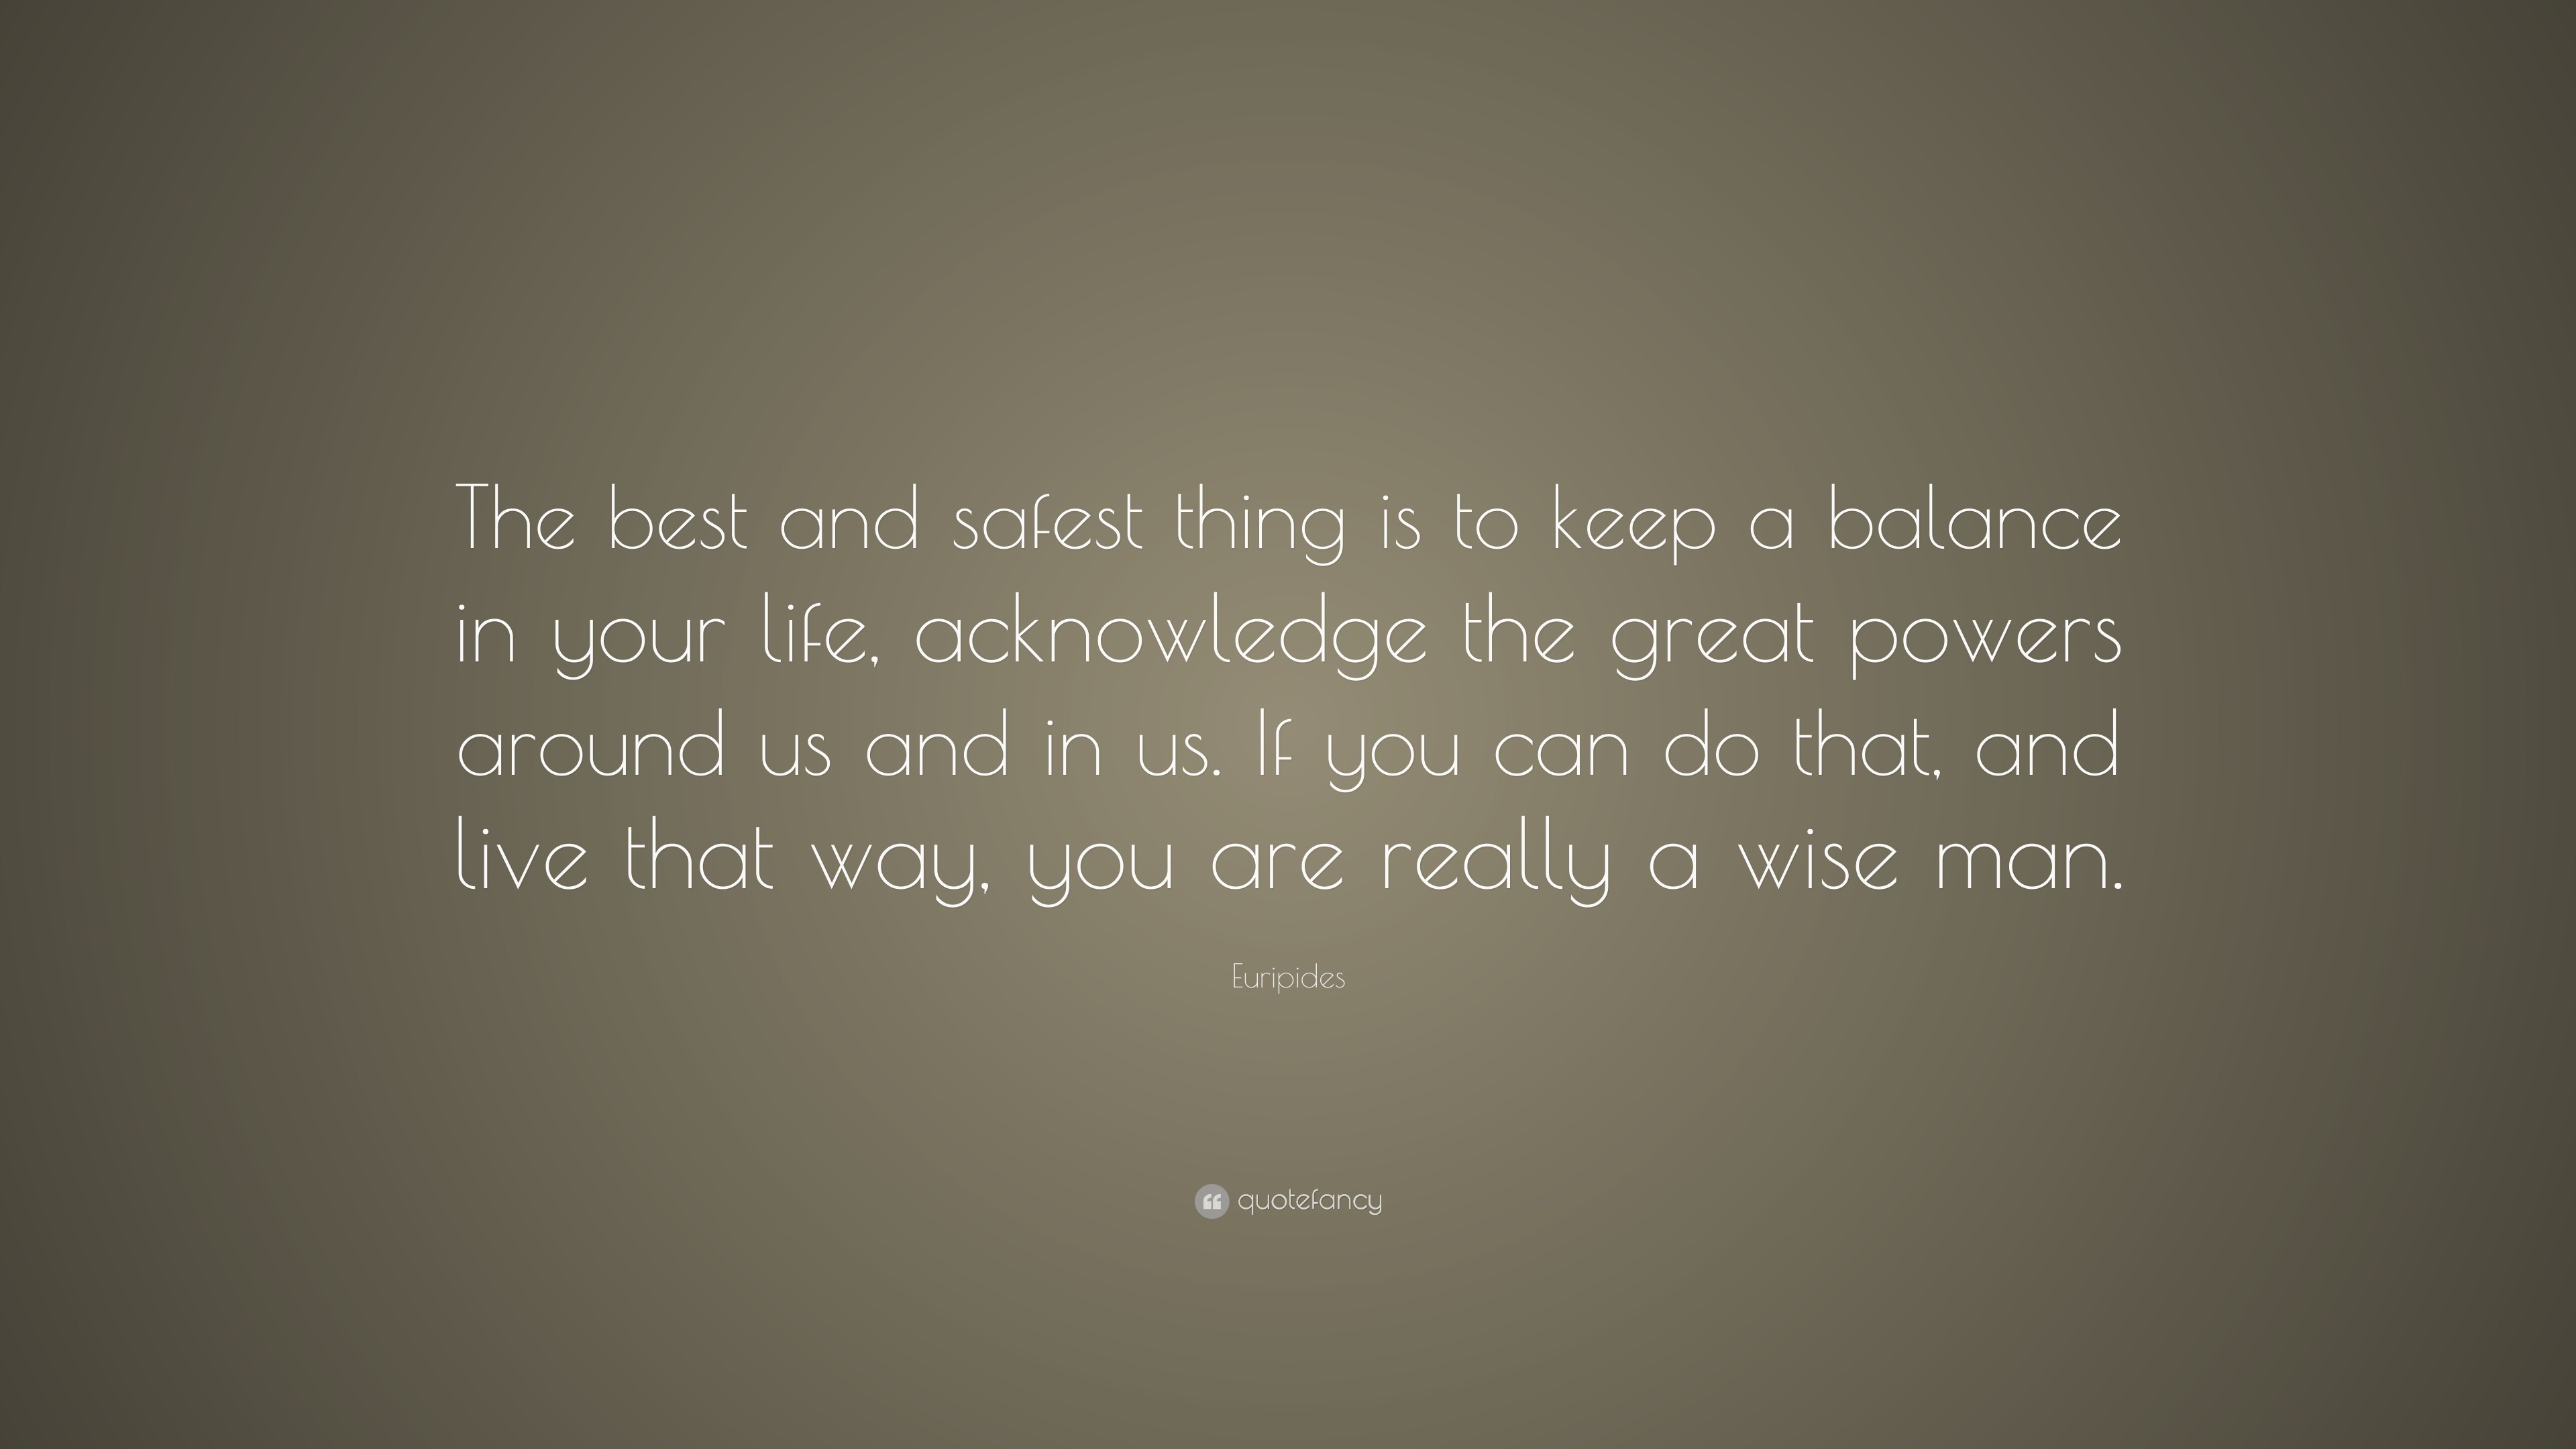 Euripides Quote: “The best and safest thing is to keep a balance in ...